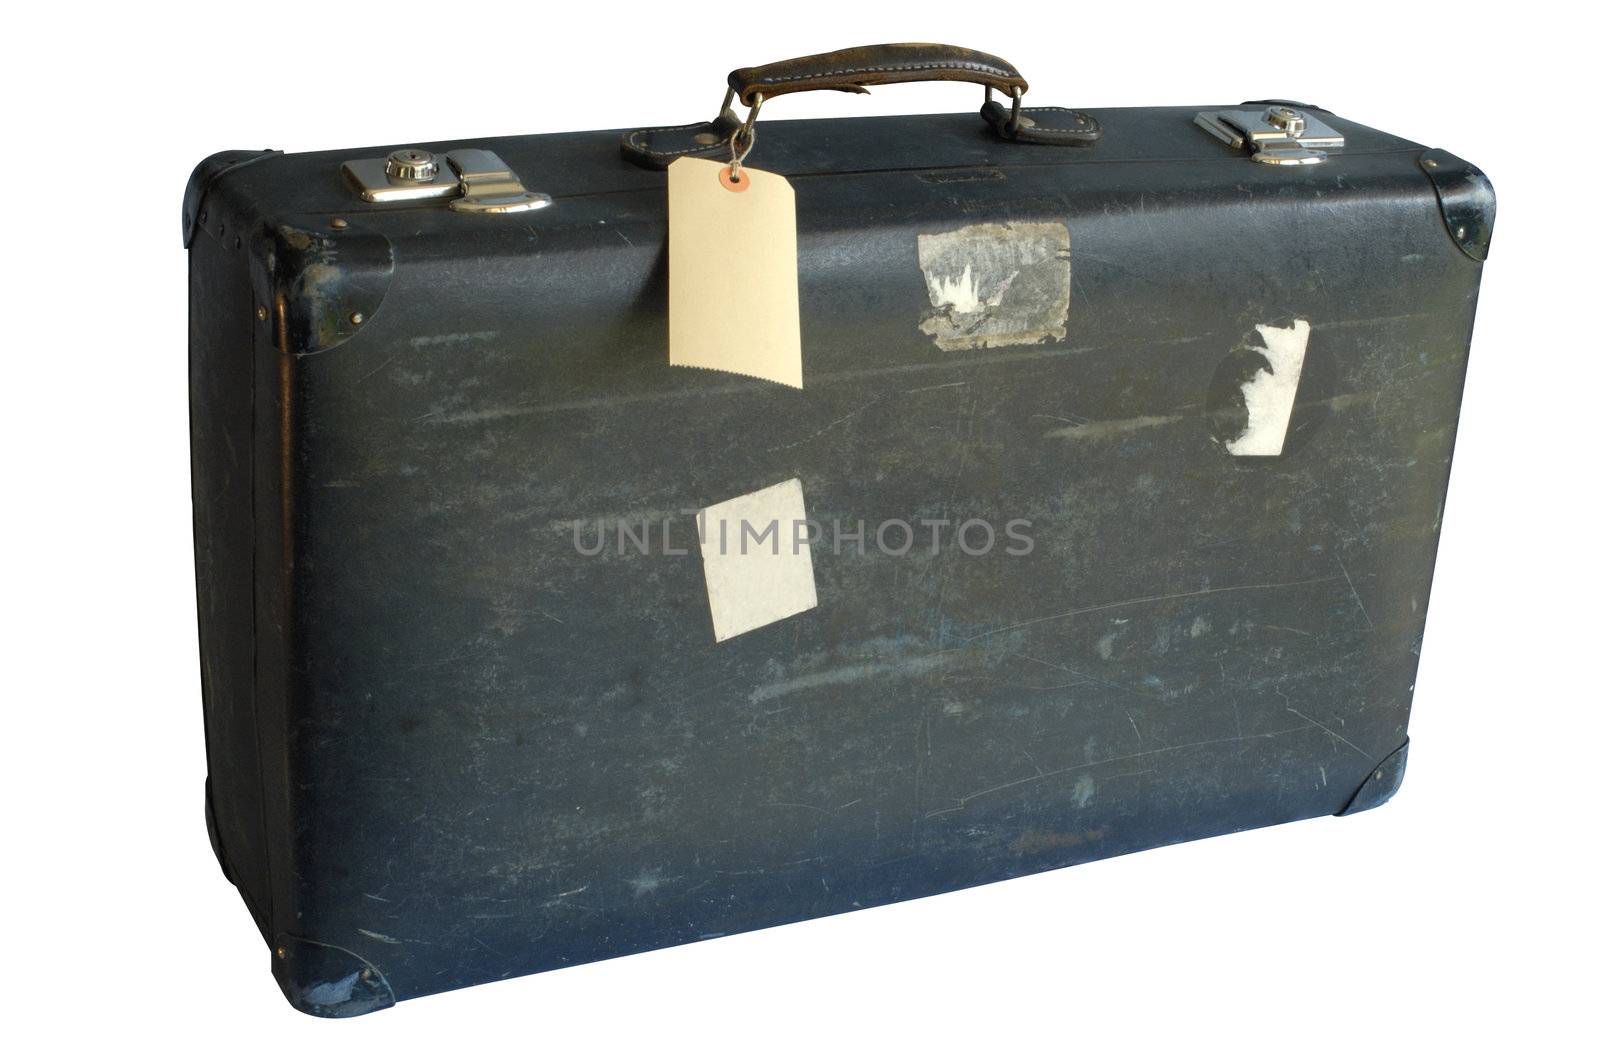 Old suitcase (with clipping path) by Bateleur